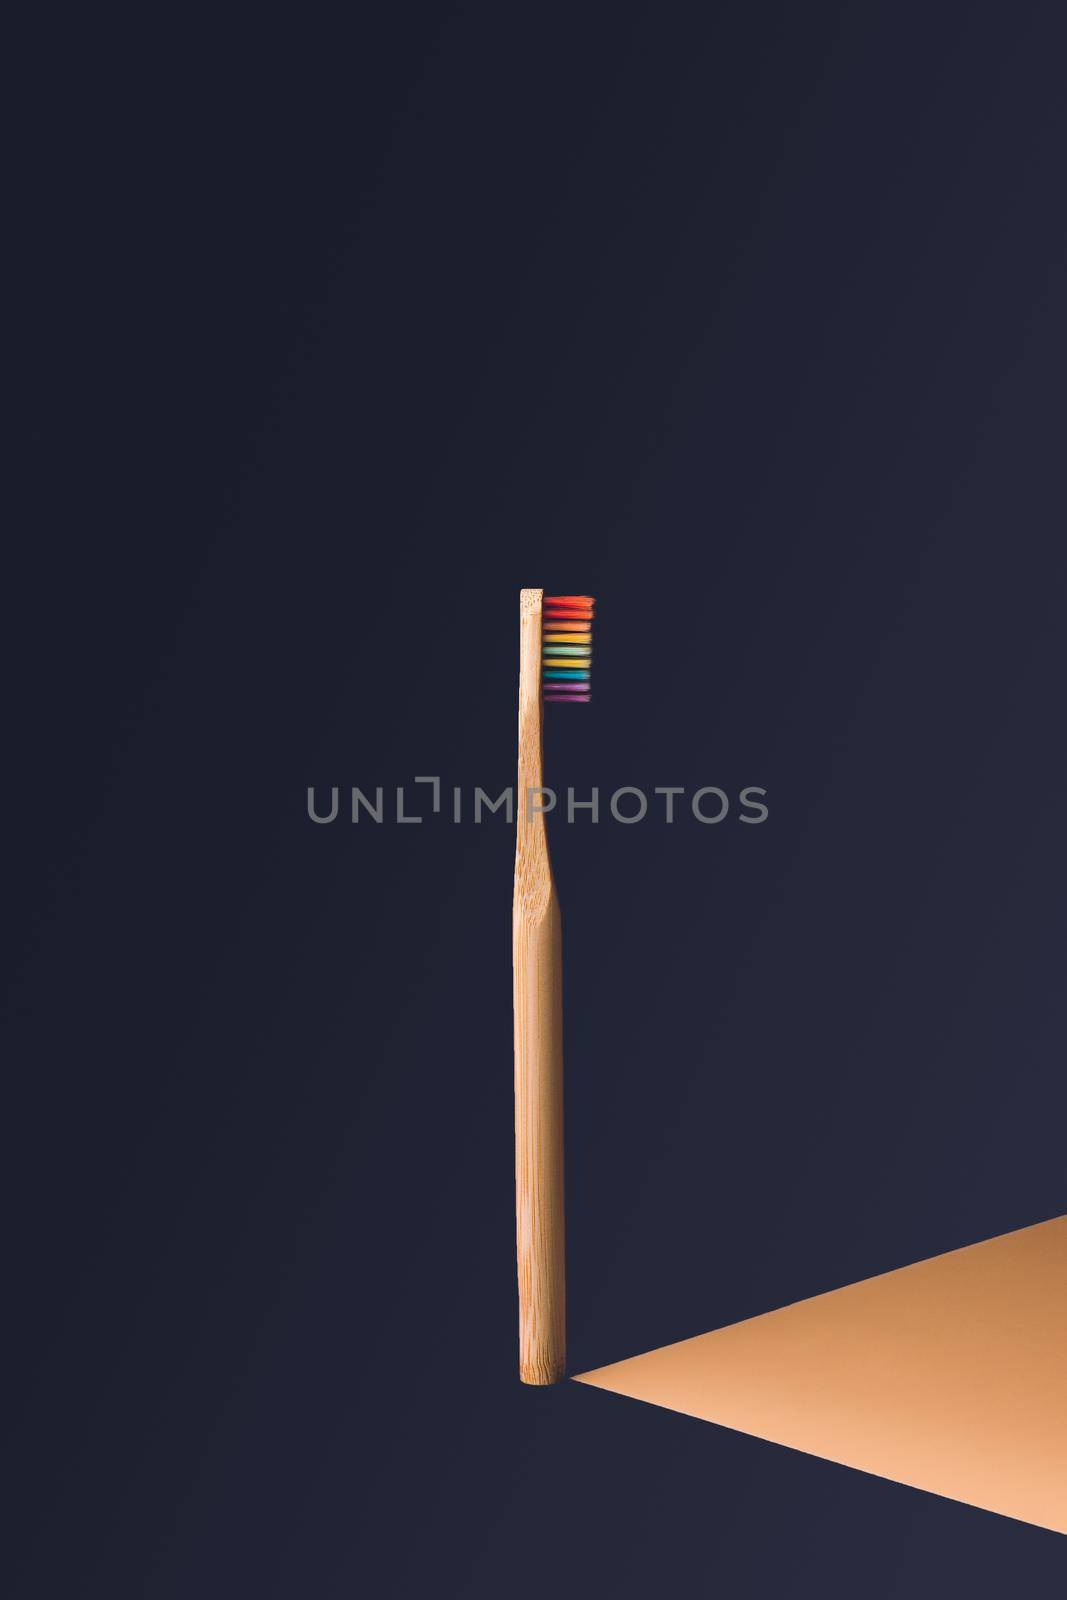 vertical rainbow wooden toothbrush in center of image with dark blue background with orange shadow effect projected to the right